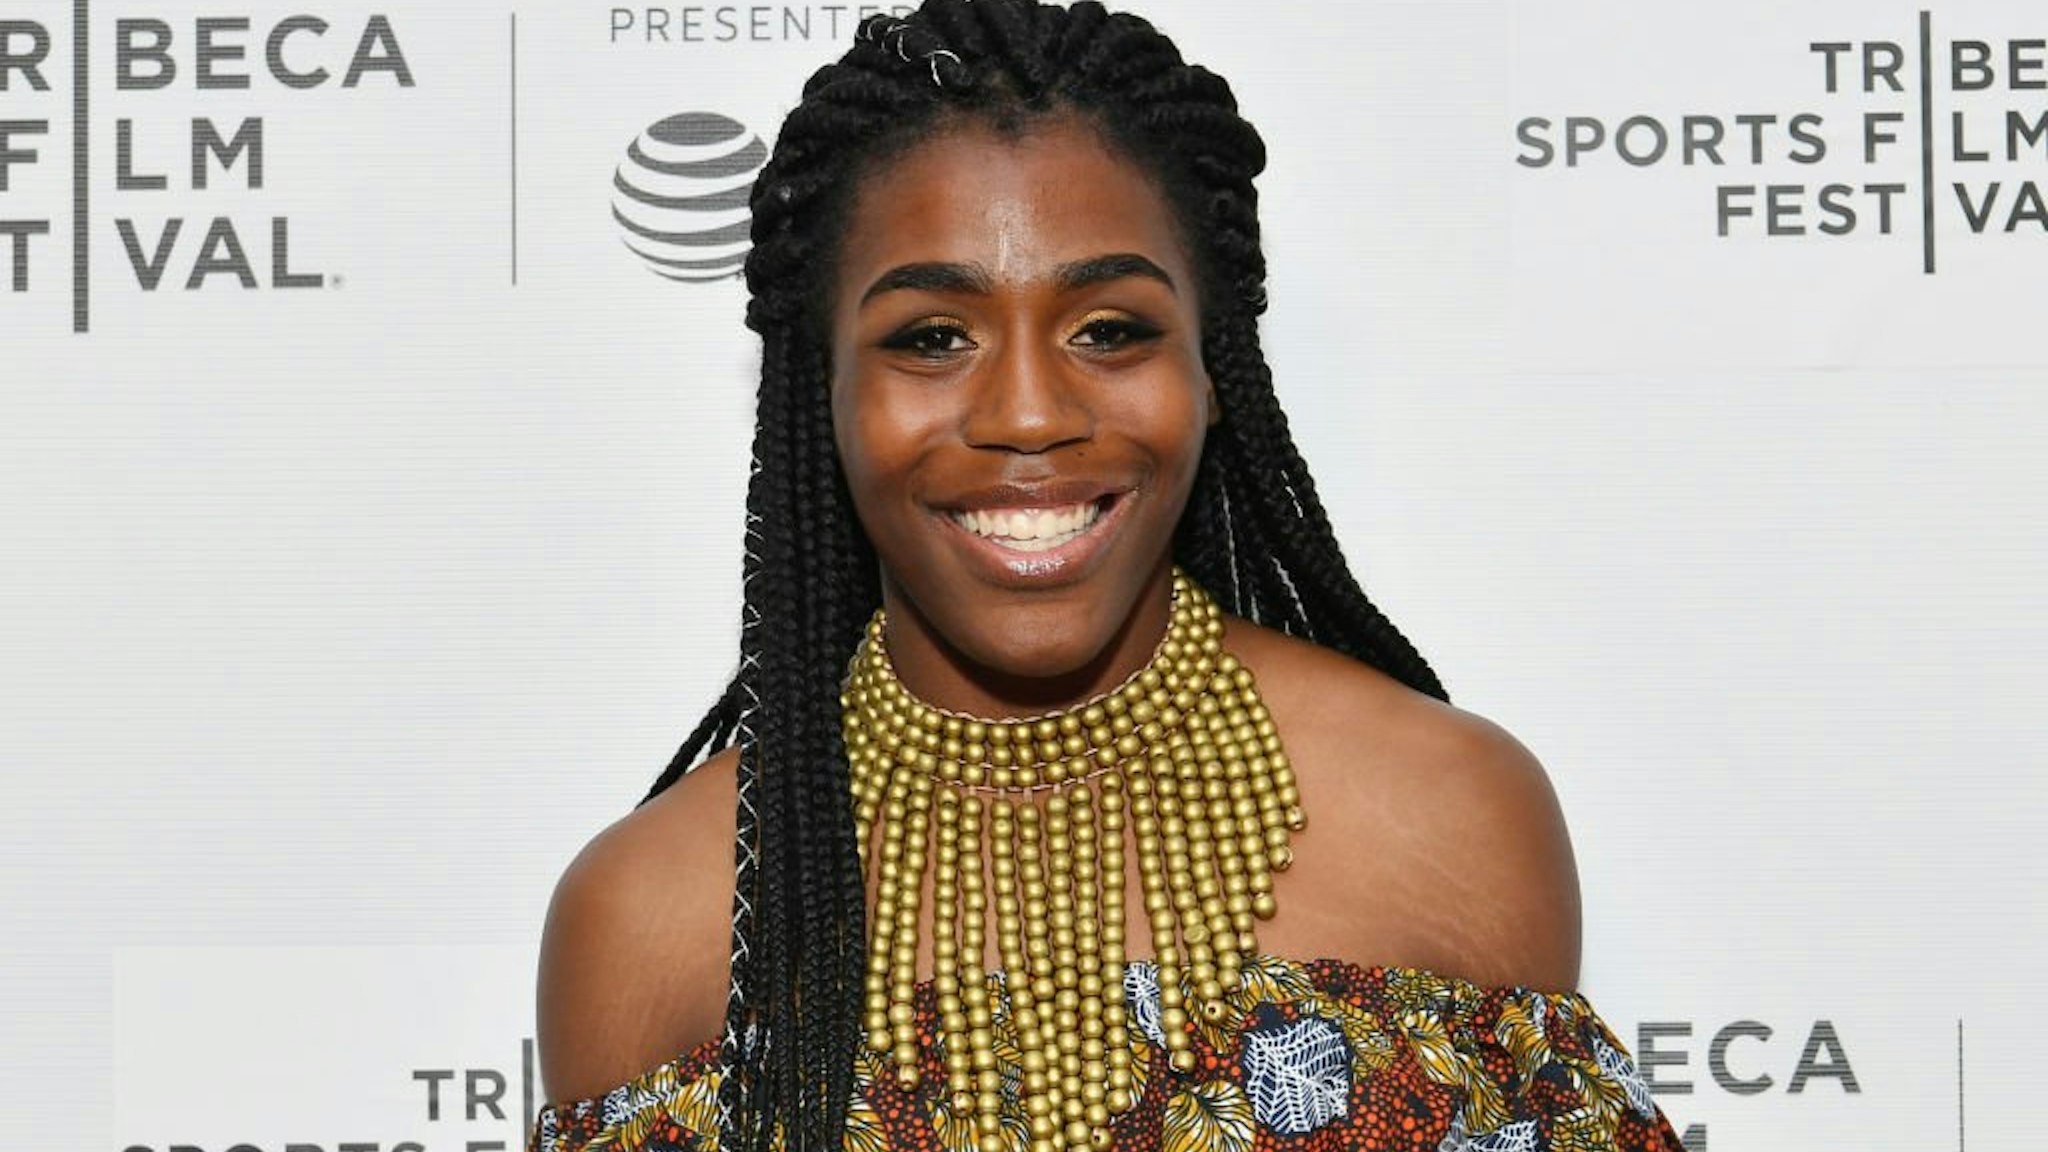 Andraya Yearwood attends the "Changing The Game" screening during the 2019 Tribeca Film Festival at Village East Cinema on April 26, 2019 in New York City.